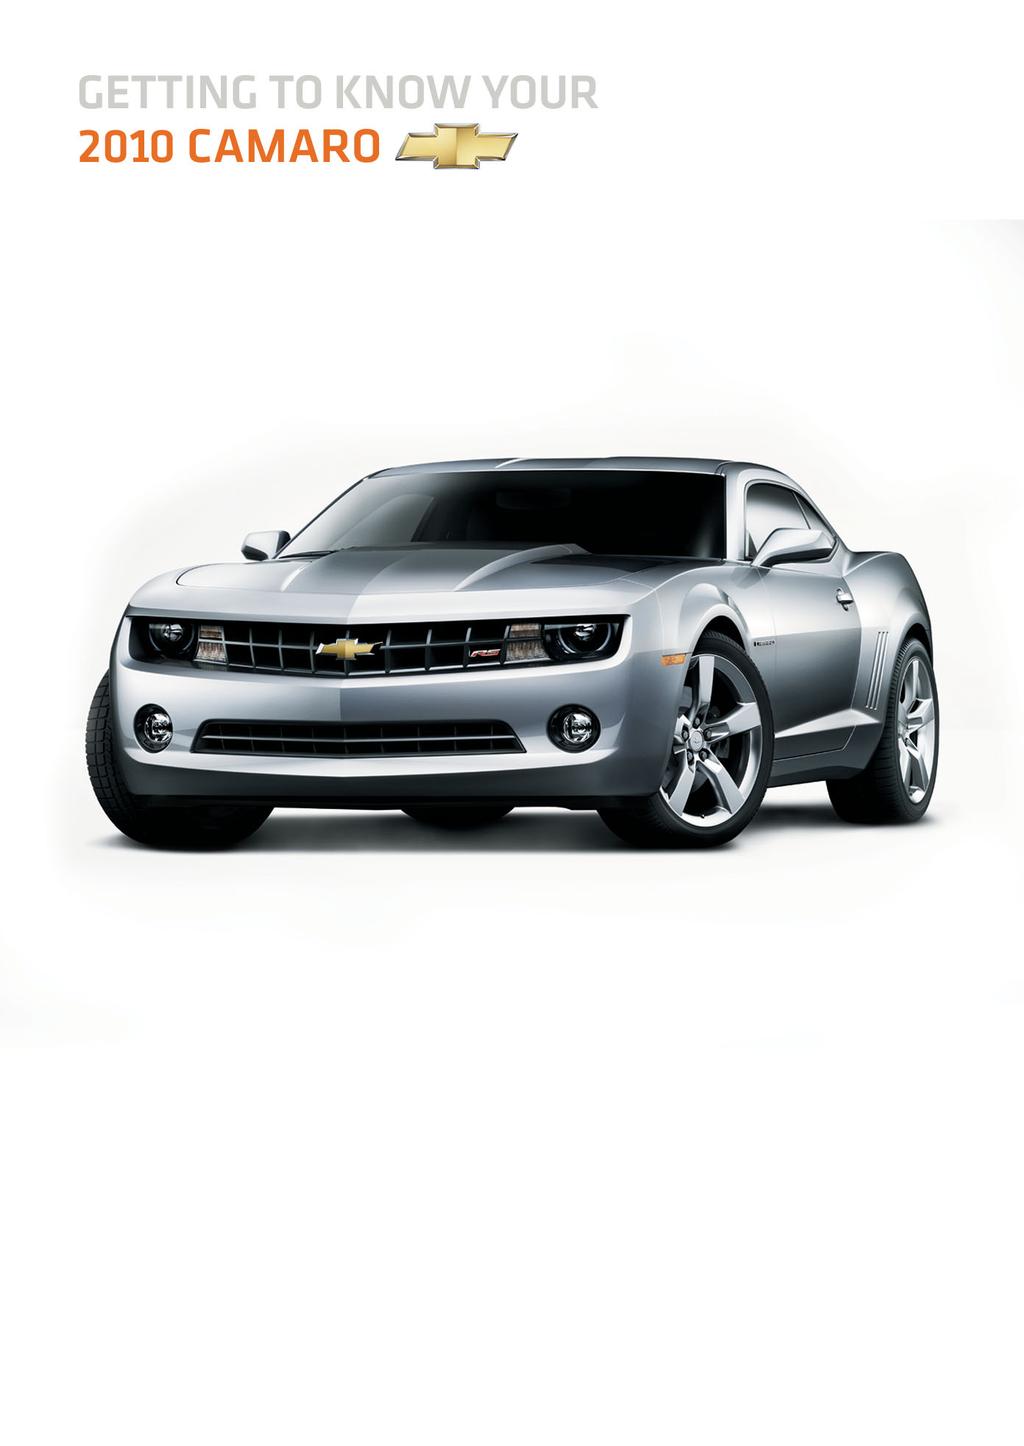 Review this Quick Reference Guide for an overview of some important features in your Chevrolet Camaro. More detailed information can be found in your Owner Manual.